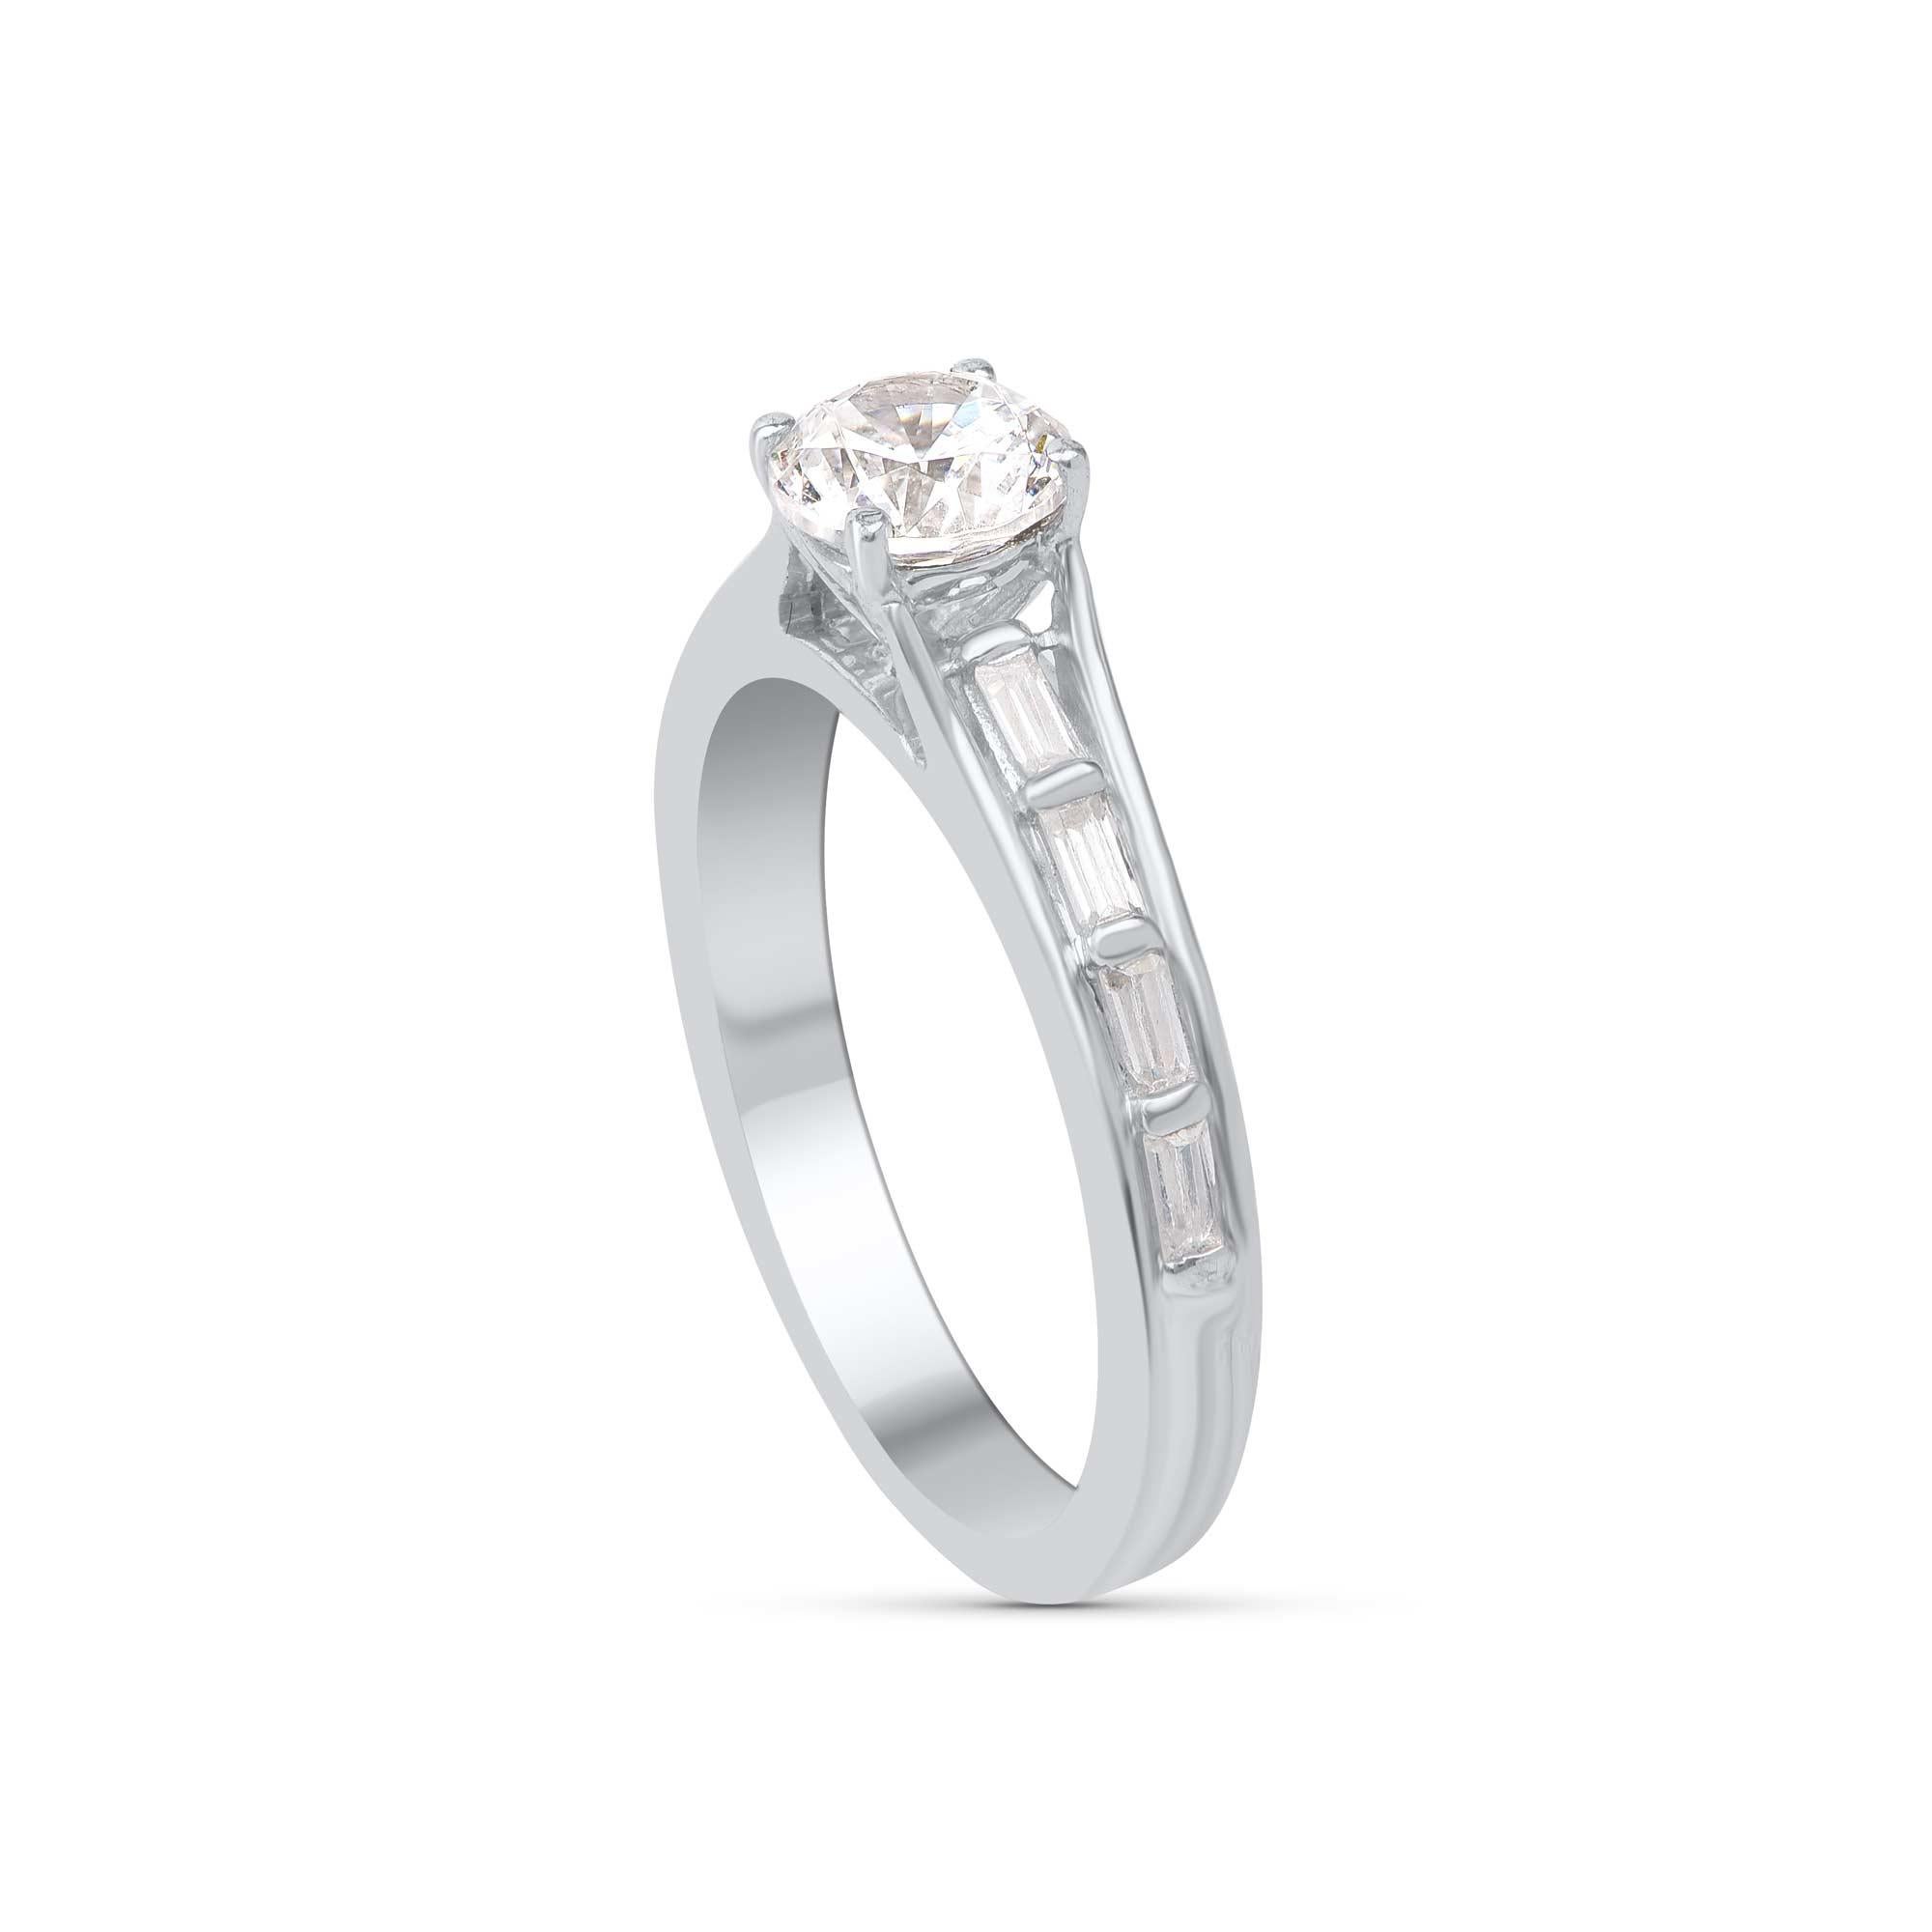 One brilliant-cut and eight baguette diamonds embedded beautifully in prong, channel setting, and handcrafted by our in-house experts in 18 KT white gold. Diamonds are graded H Color, I1 Clarity. 

Metal color and ring size can be customized on